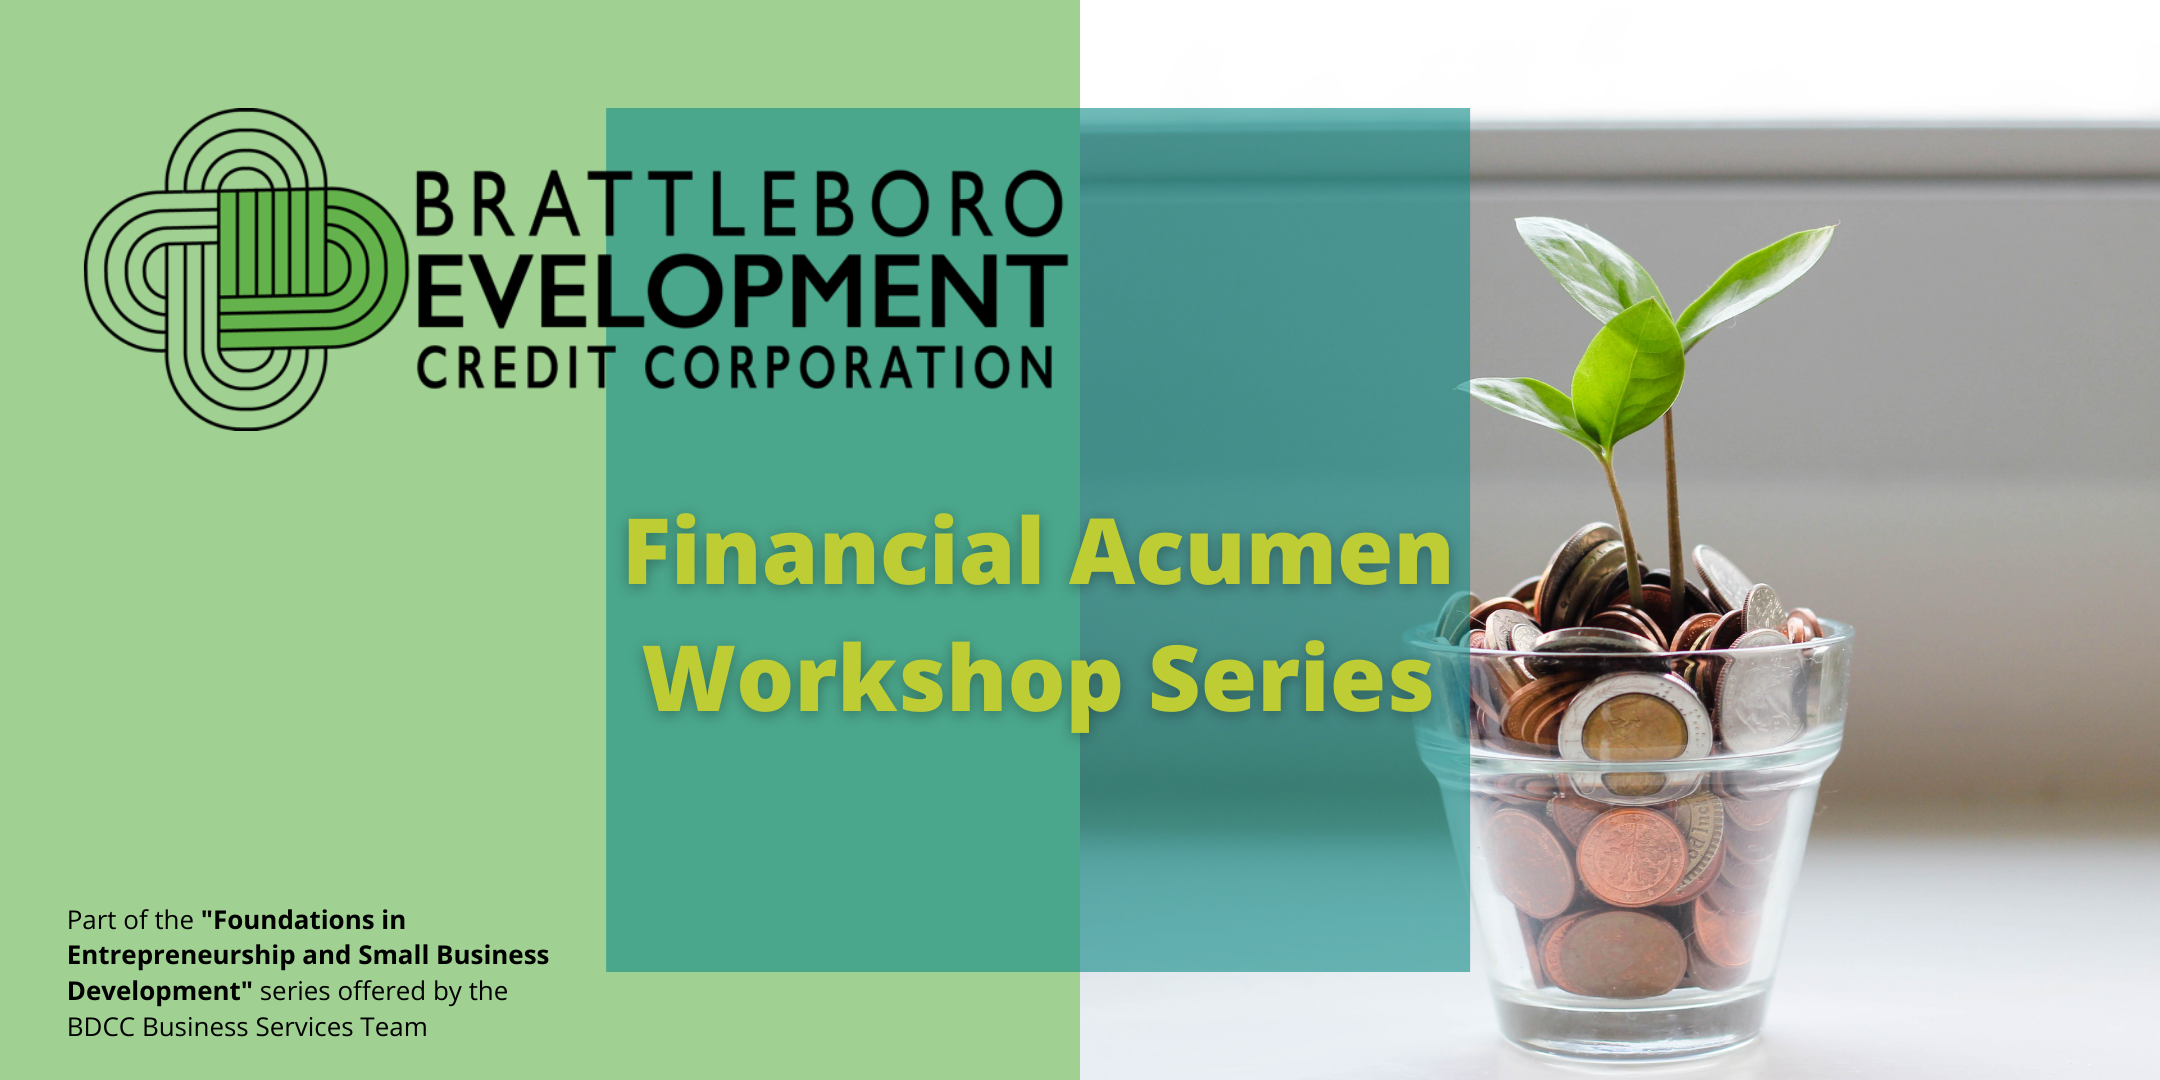 Small Business Financial Acumen Series – Starting March 2022